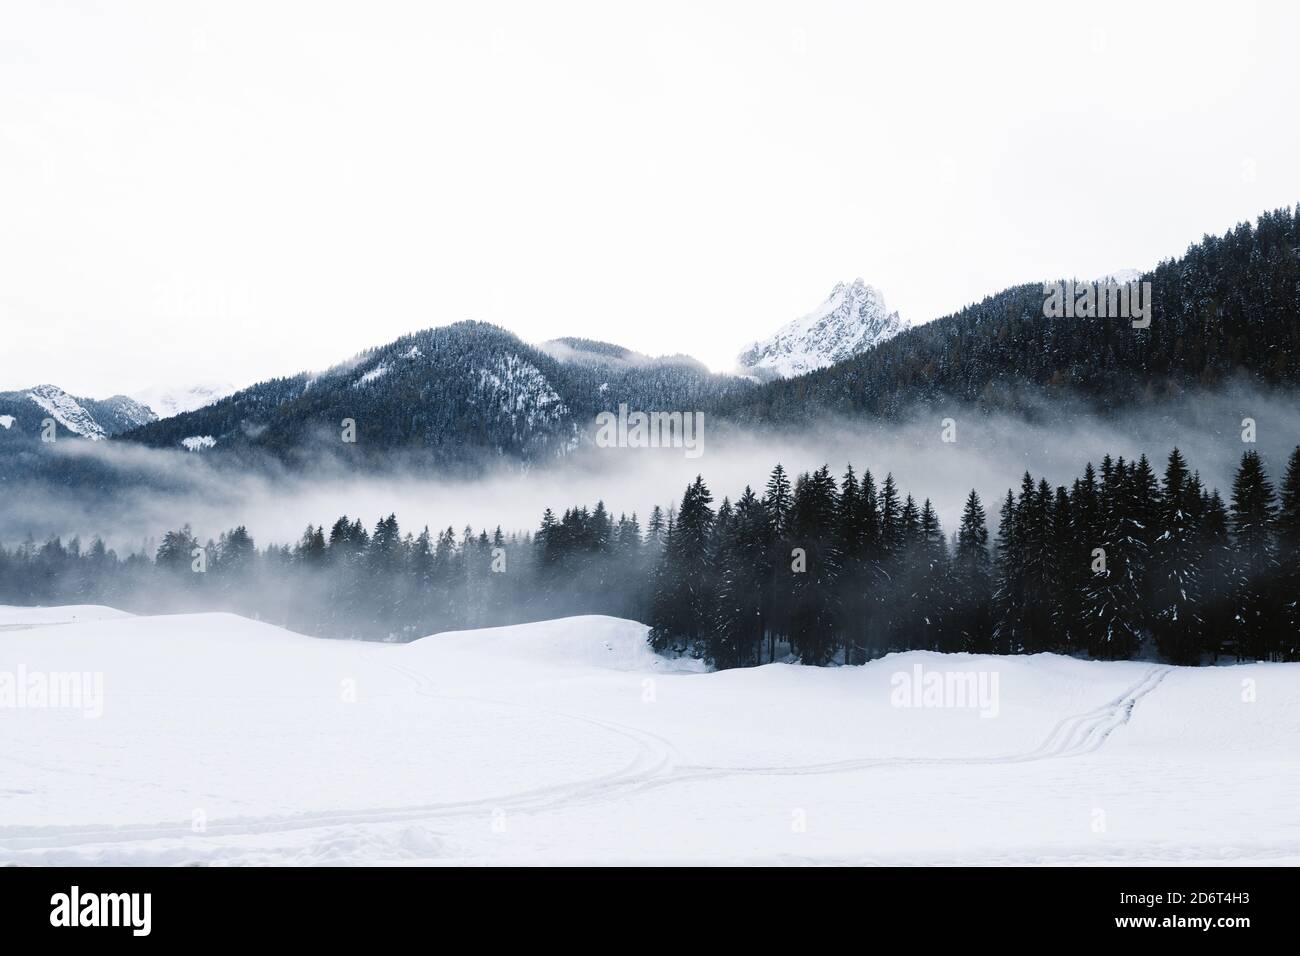 Cold winter scenery of mountain valley with dark coniferous woods and ...